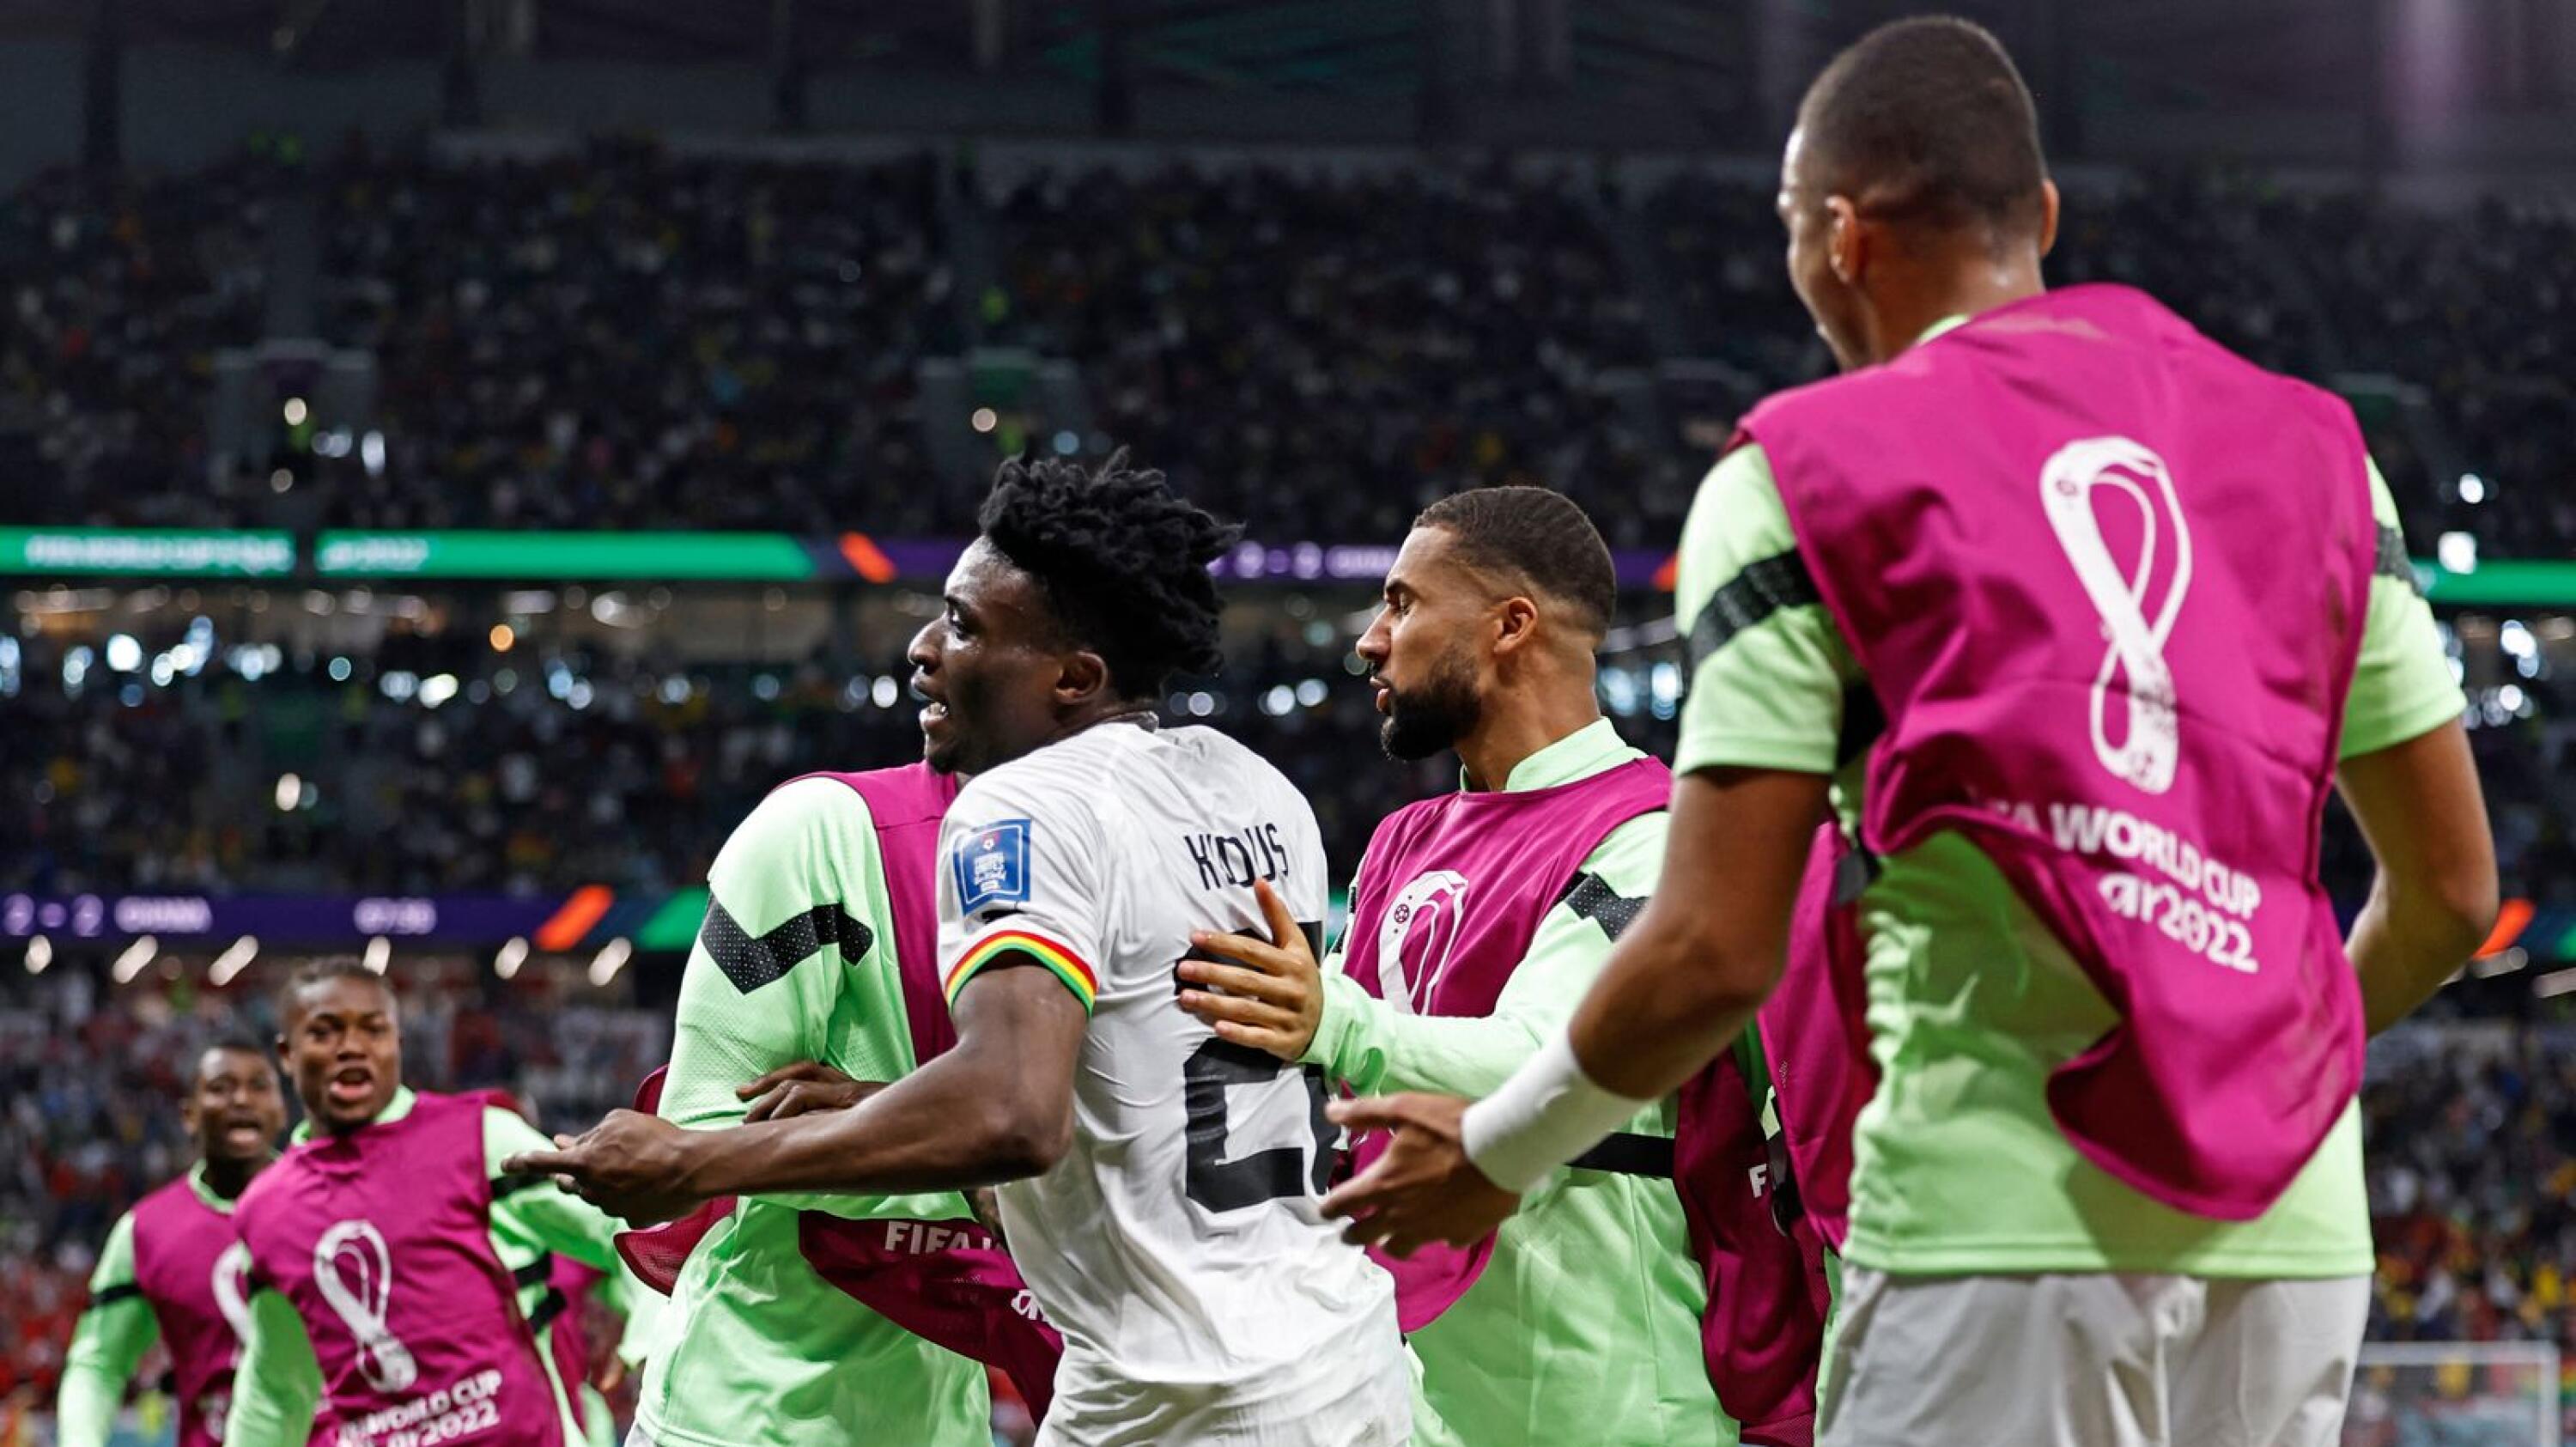 Ghana's Mohammed Kudus celebrates with his teammates after scoring his team's third goal during their football match against South Korea at the Education City Stadium in Al-Rayyan at the World Cup on Monday. Photo: Khaled Desouki/AFP